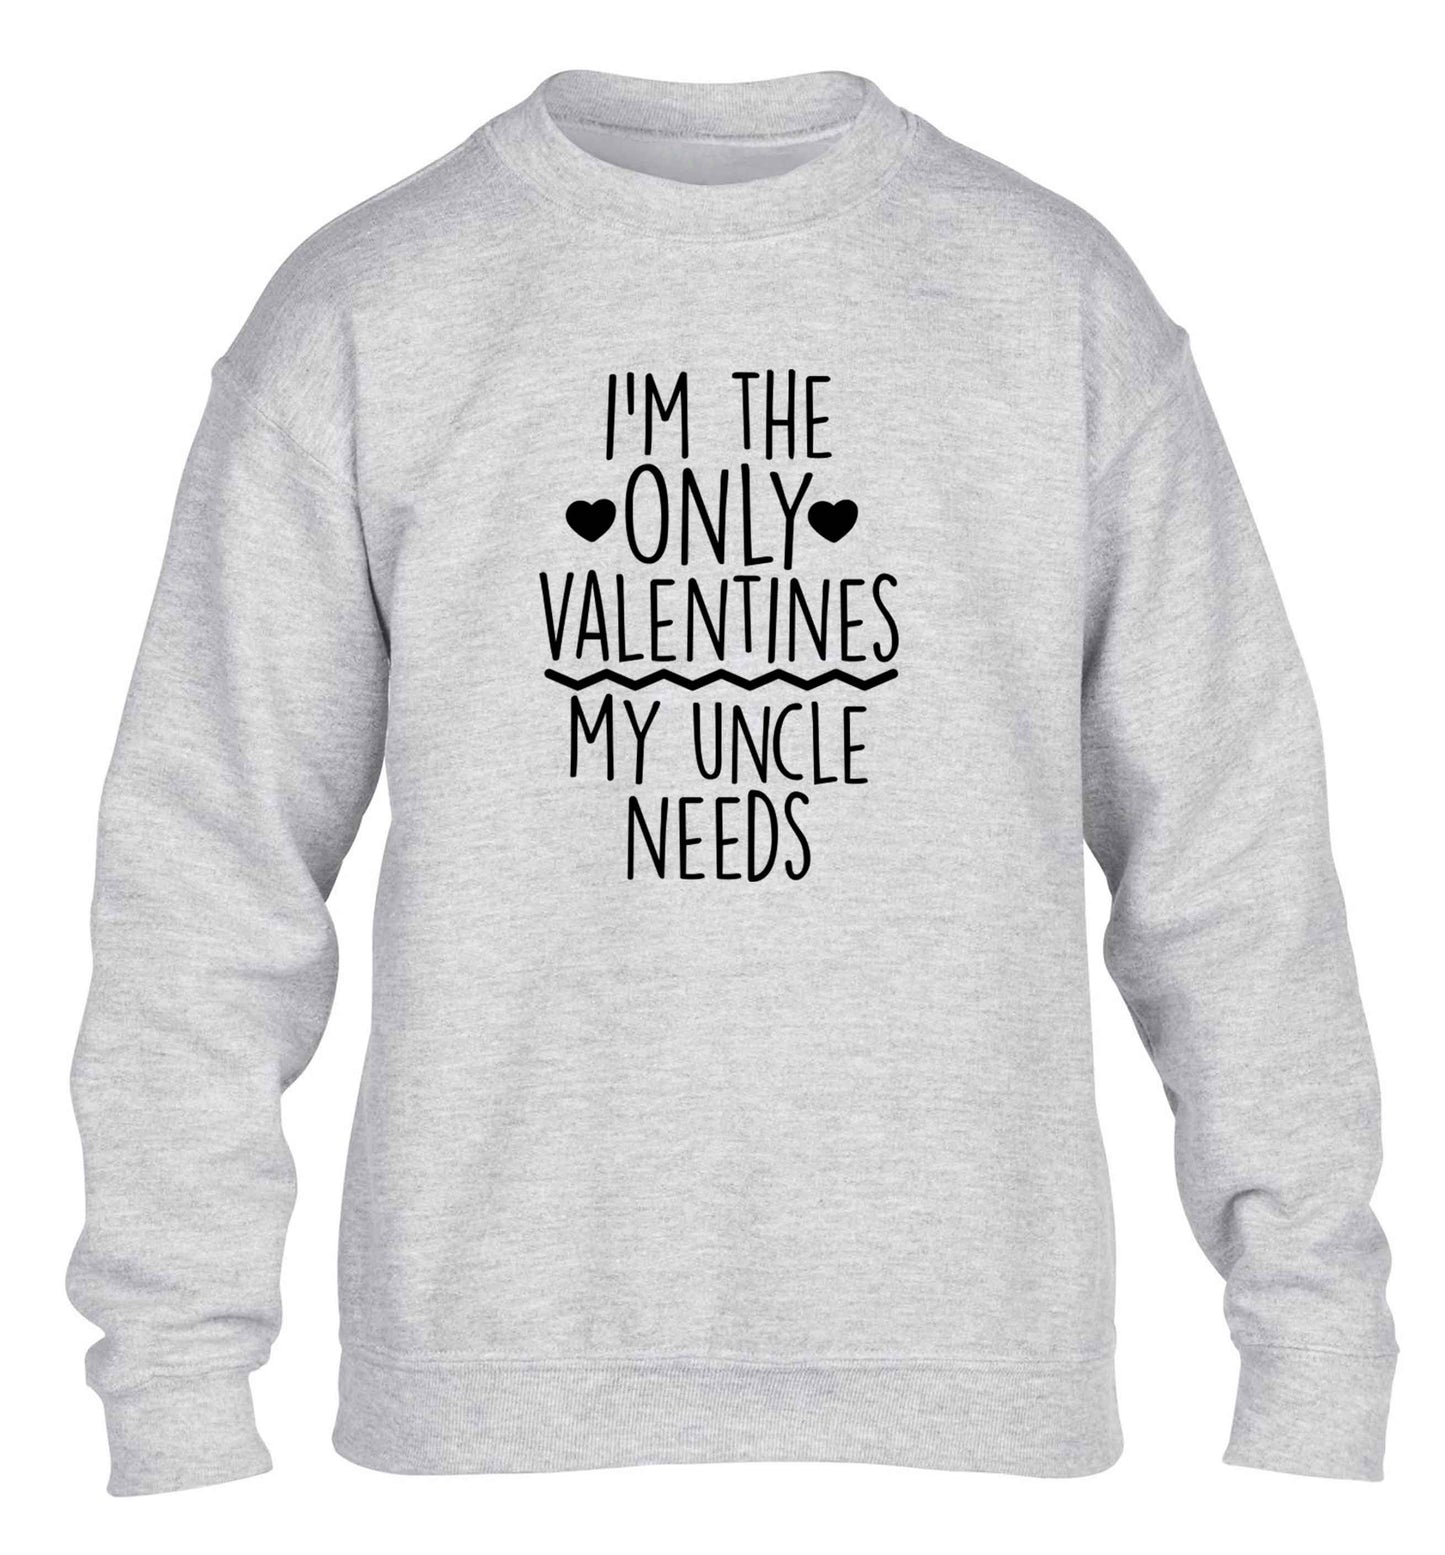 I'm the only valentines my uncle needs children's grey sweater 12-13 Years